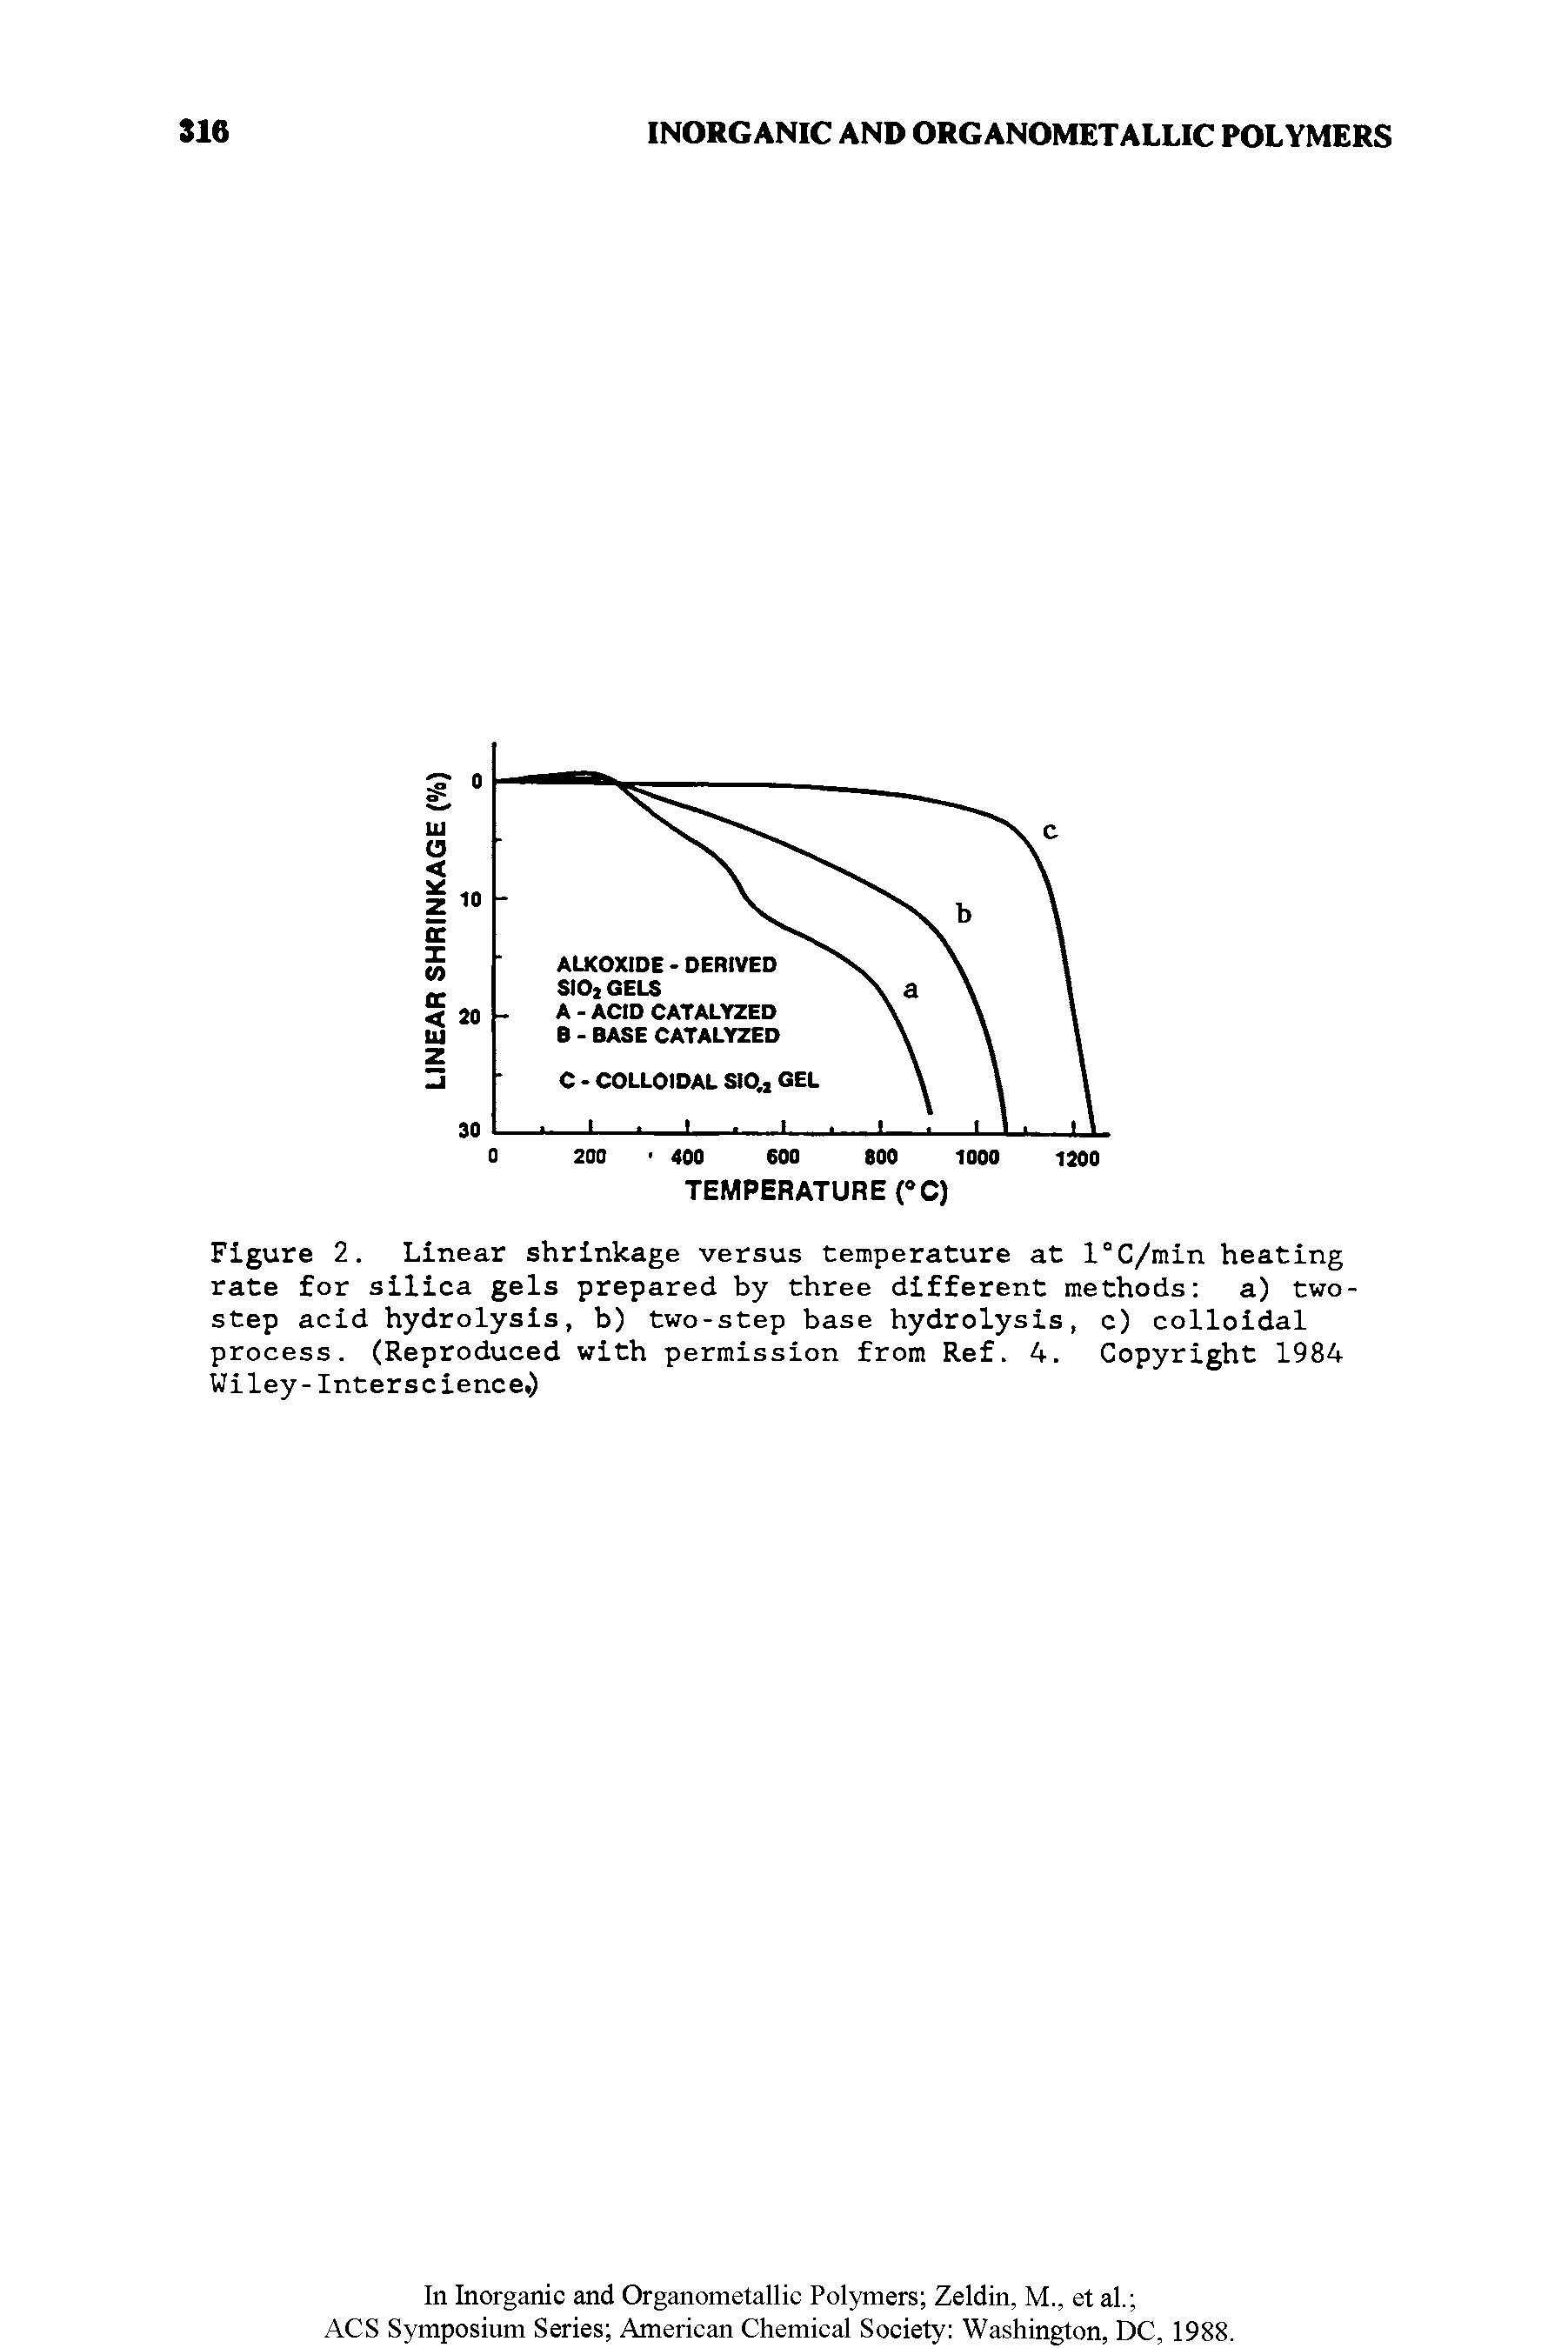 Figure 2. Linear shrinkage versus temperature at l°C/min heating rate for silica gels prepared by three different methods a) two-step acid hydrolysis, b) two-step base hydrolysis, c) colloidal process. (Reproduced with permission from Ref. 4. Copyright 1984 Wiley- Interscience.)...